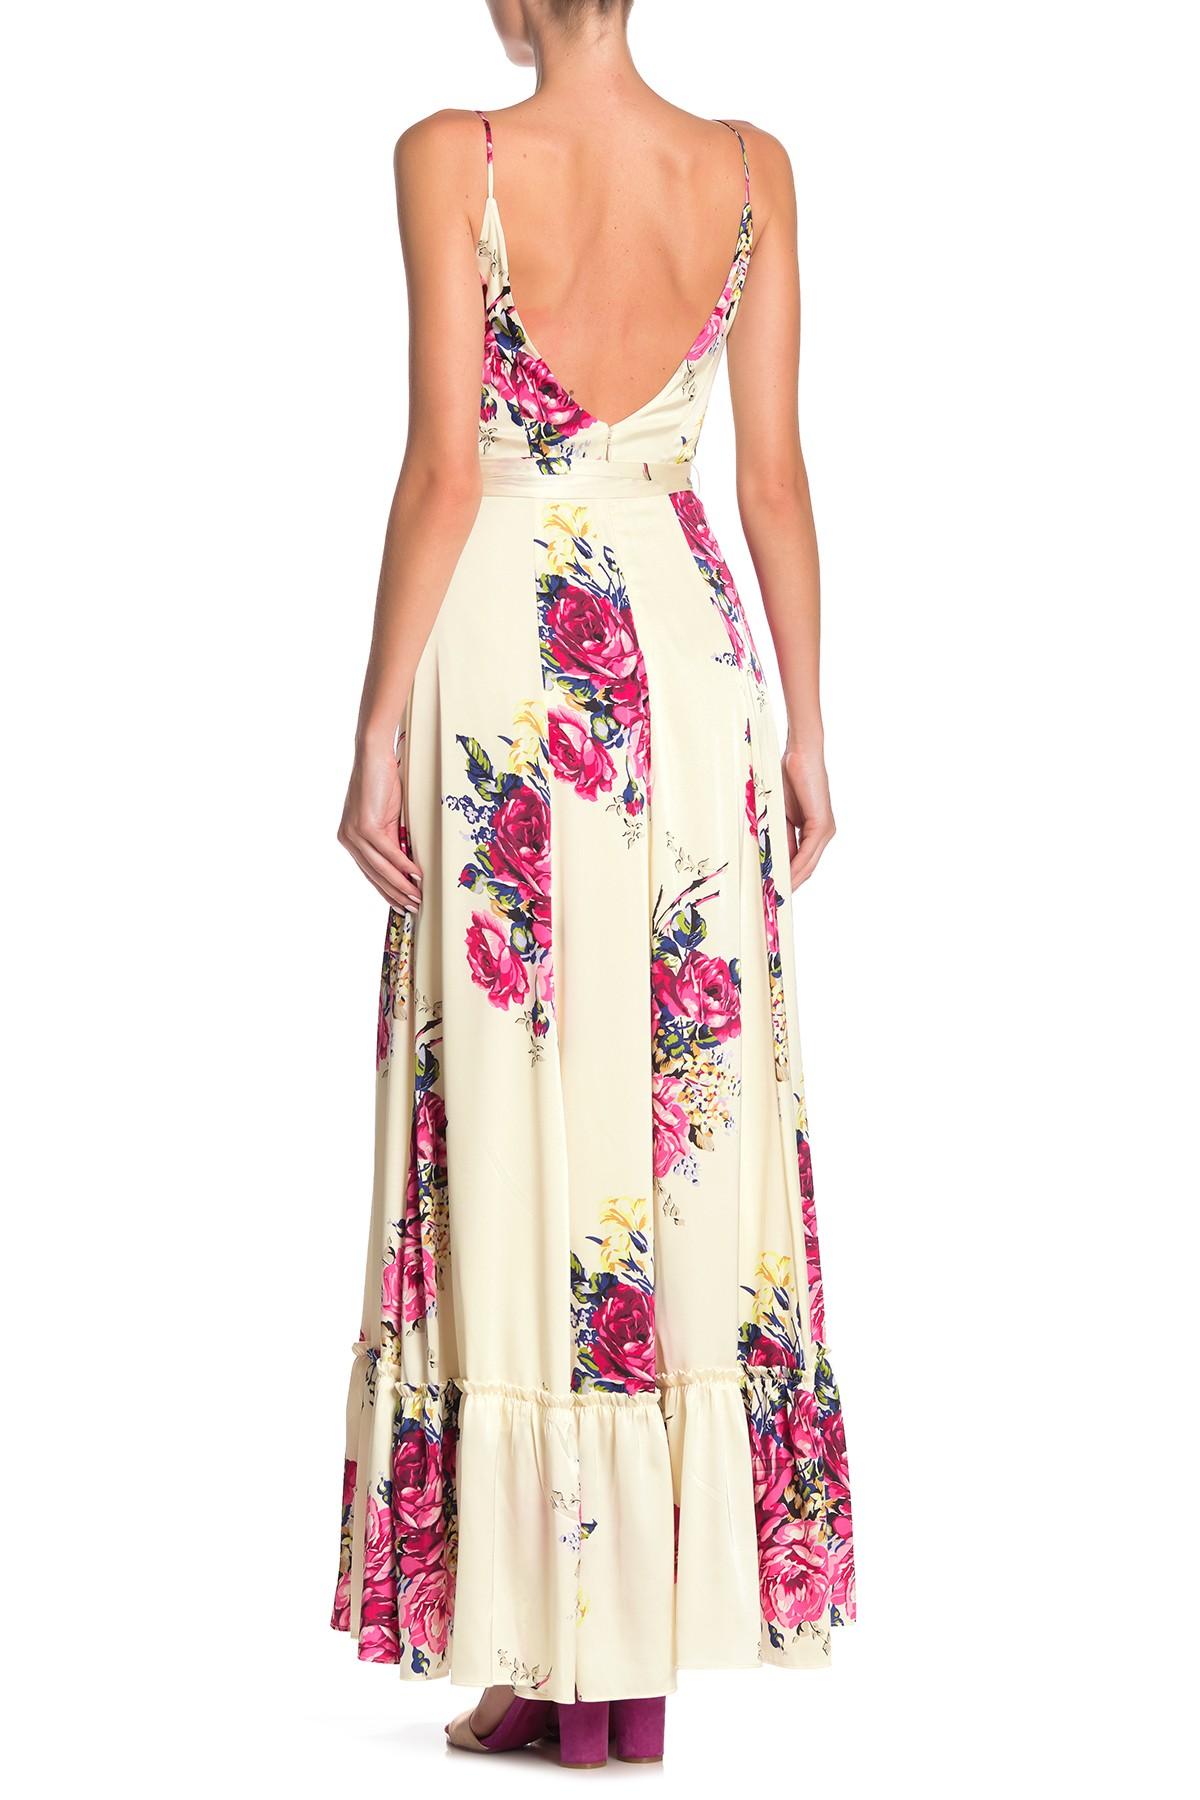 Betsey Johnson Floral Satin Maxi Dress in Pink - Lyst